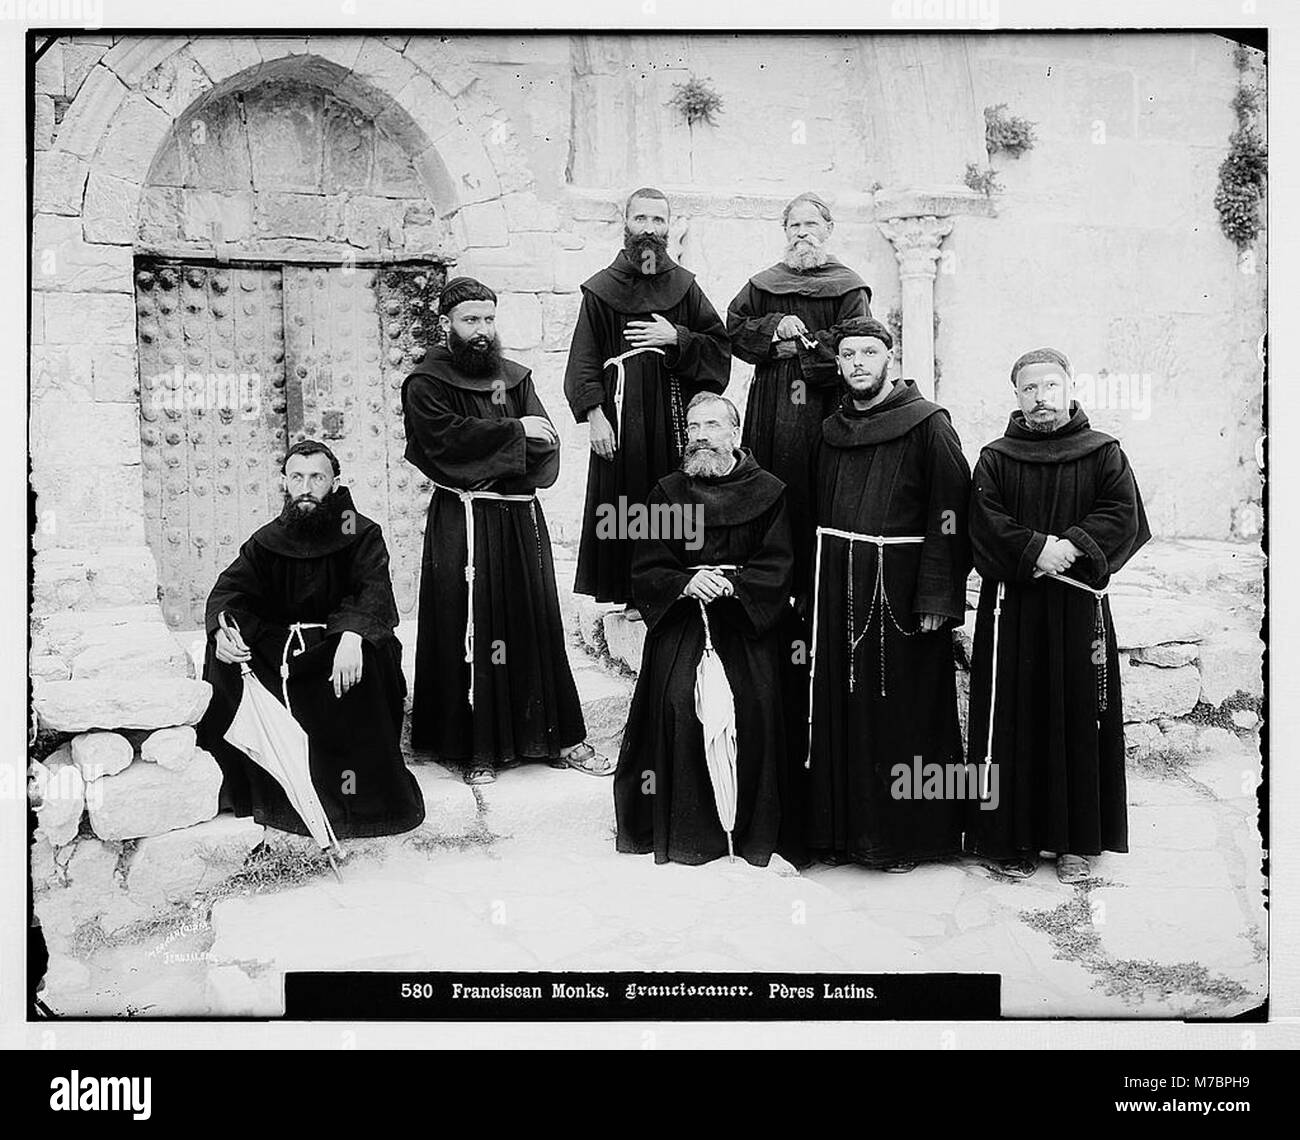 Costumes and characters, etc. Franciscan monks LOC matpc.06806 Stock Photo